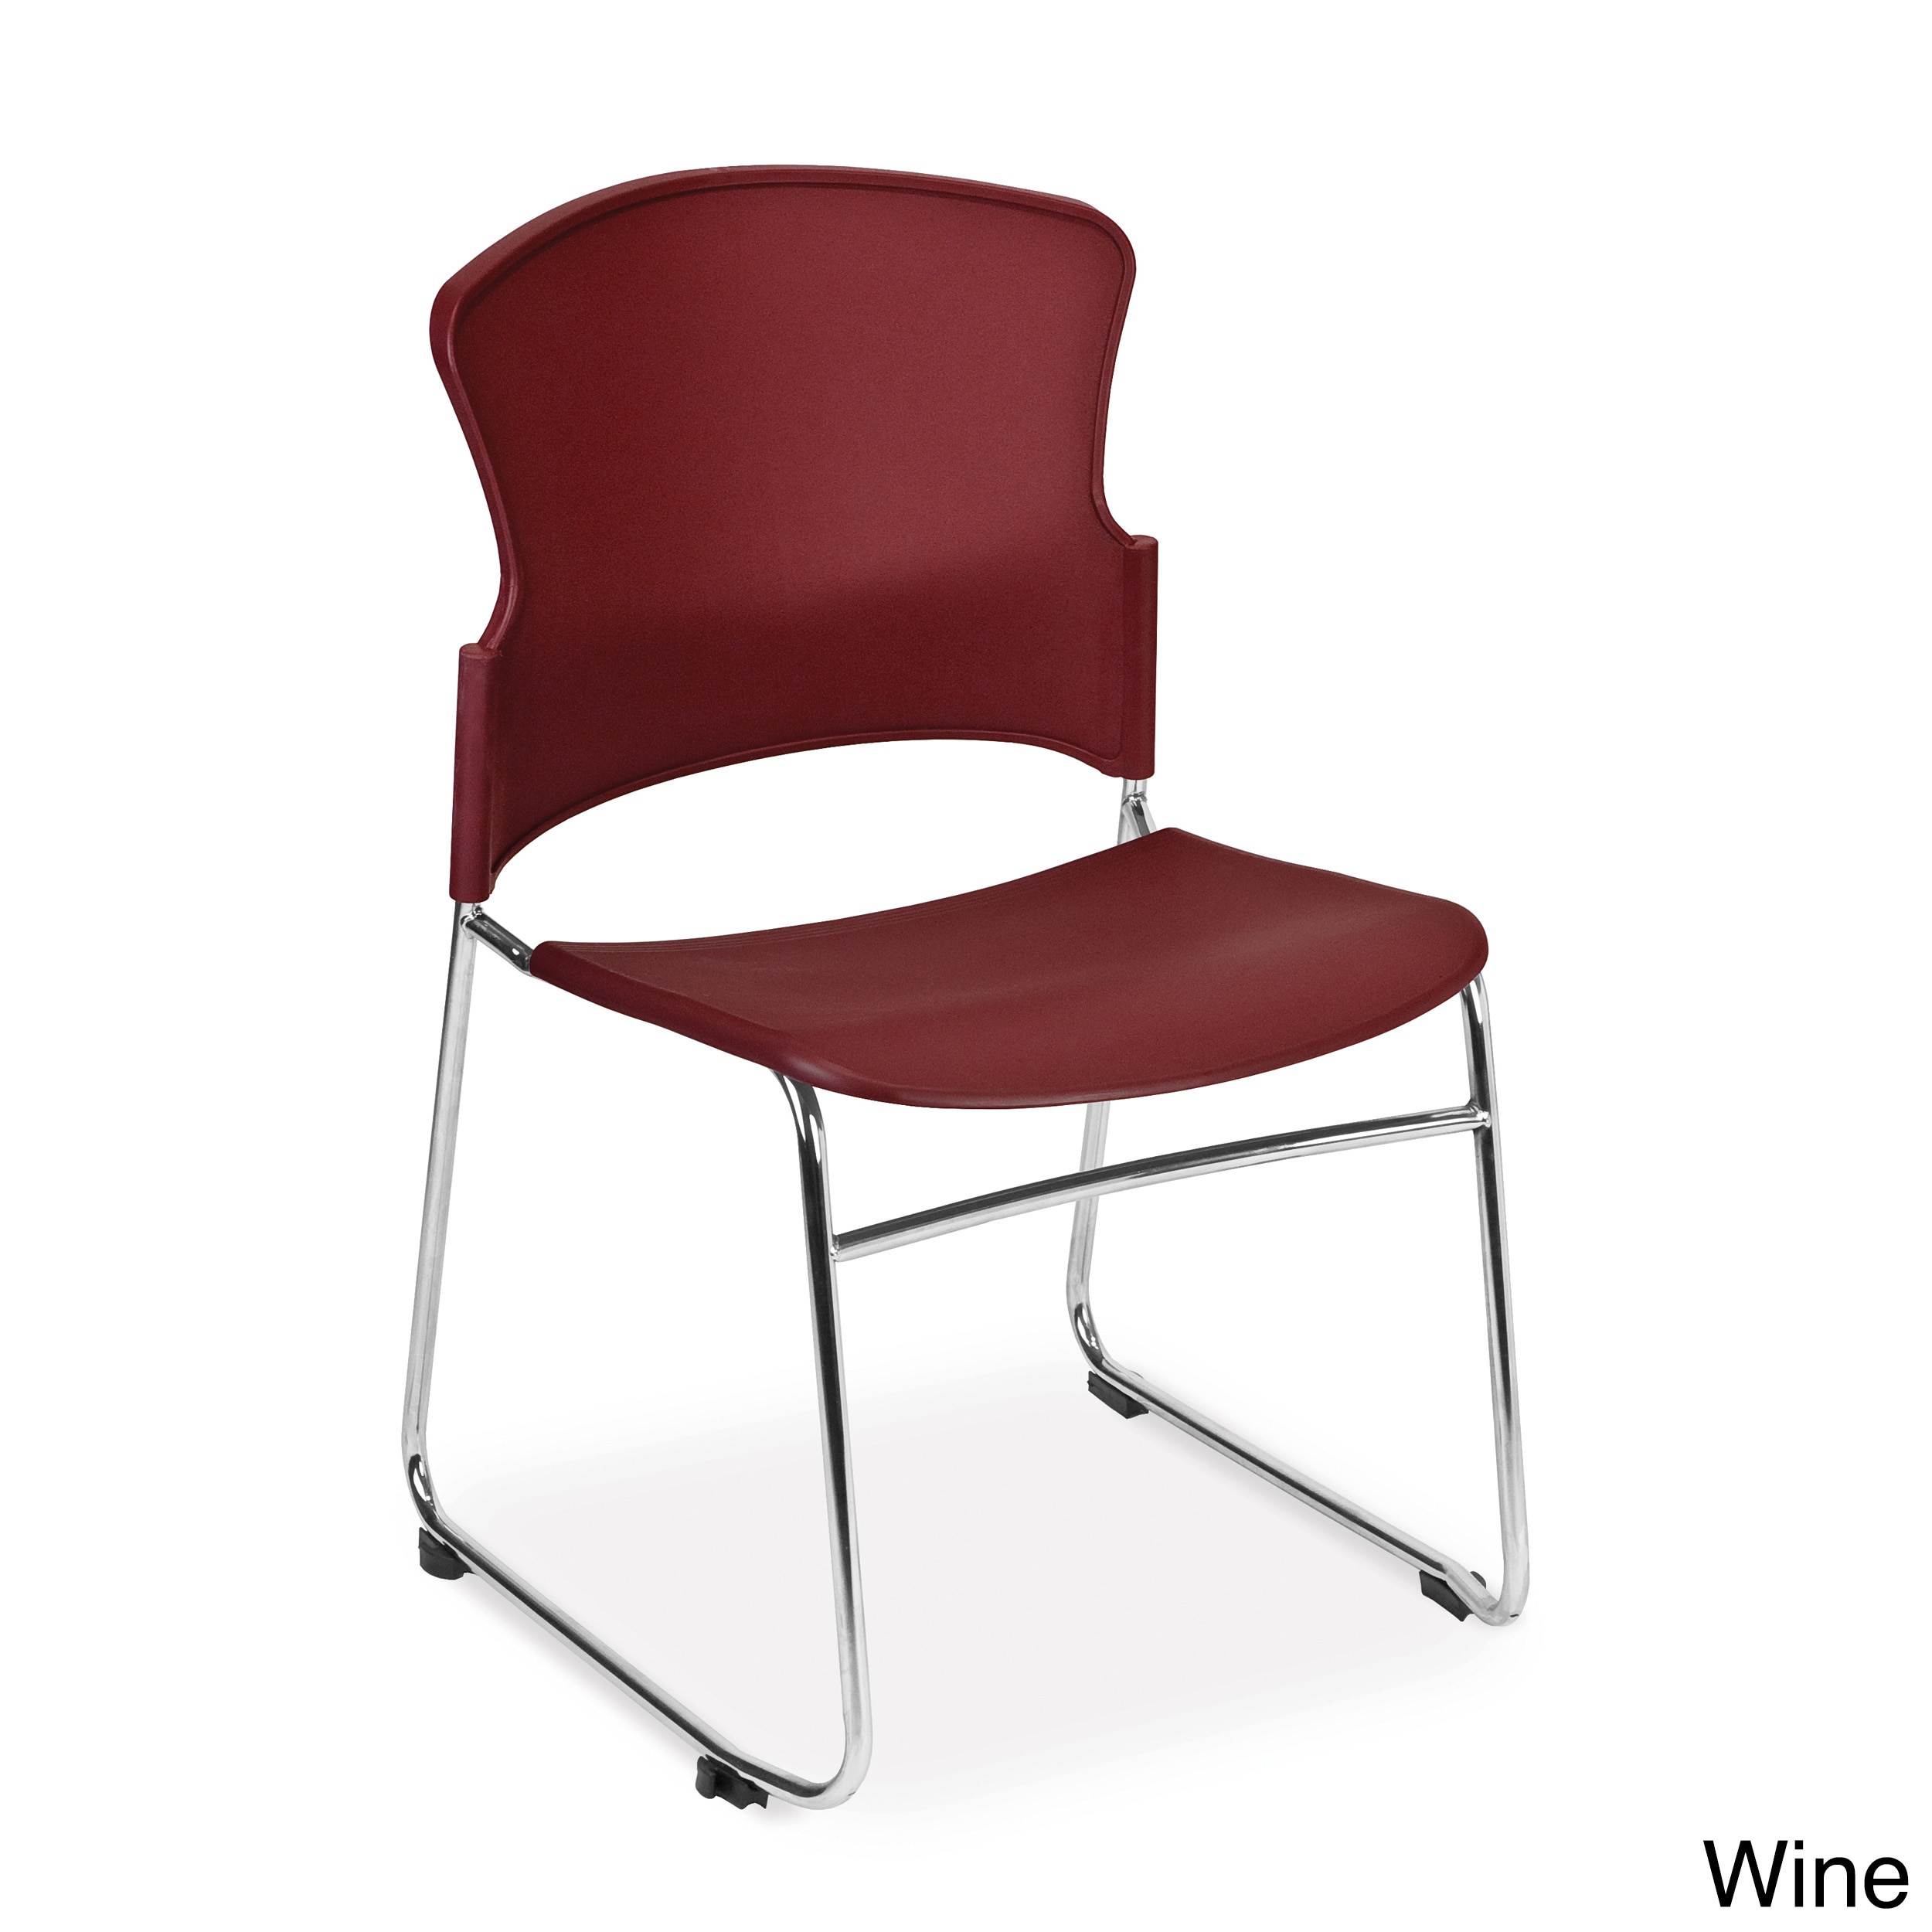 OFM  Multi-use Plastic Seat and Back Stacker Chairs (Set of 40) - image 4 of 4